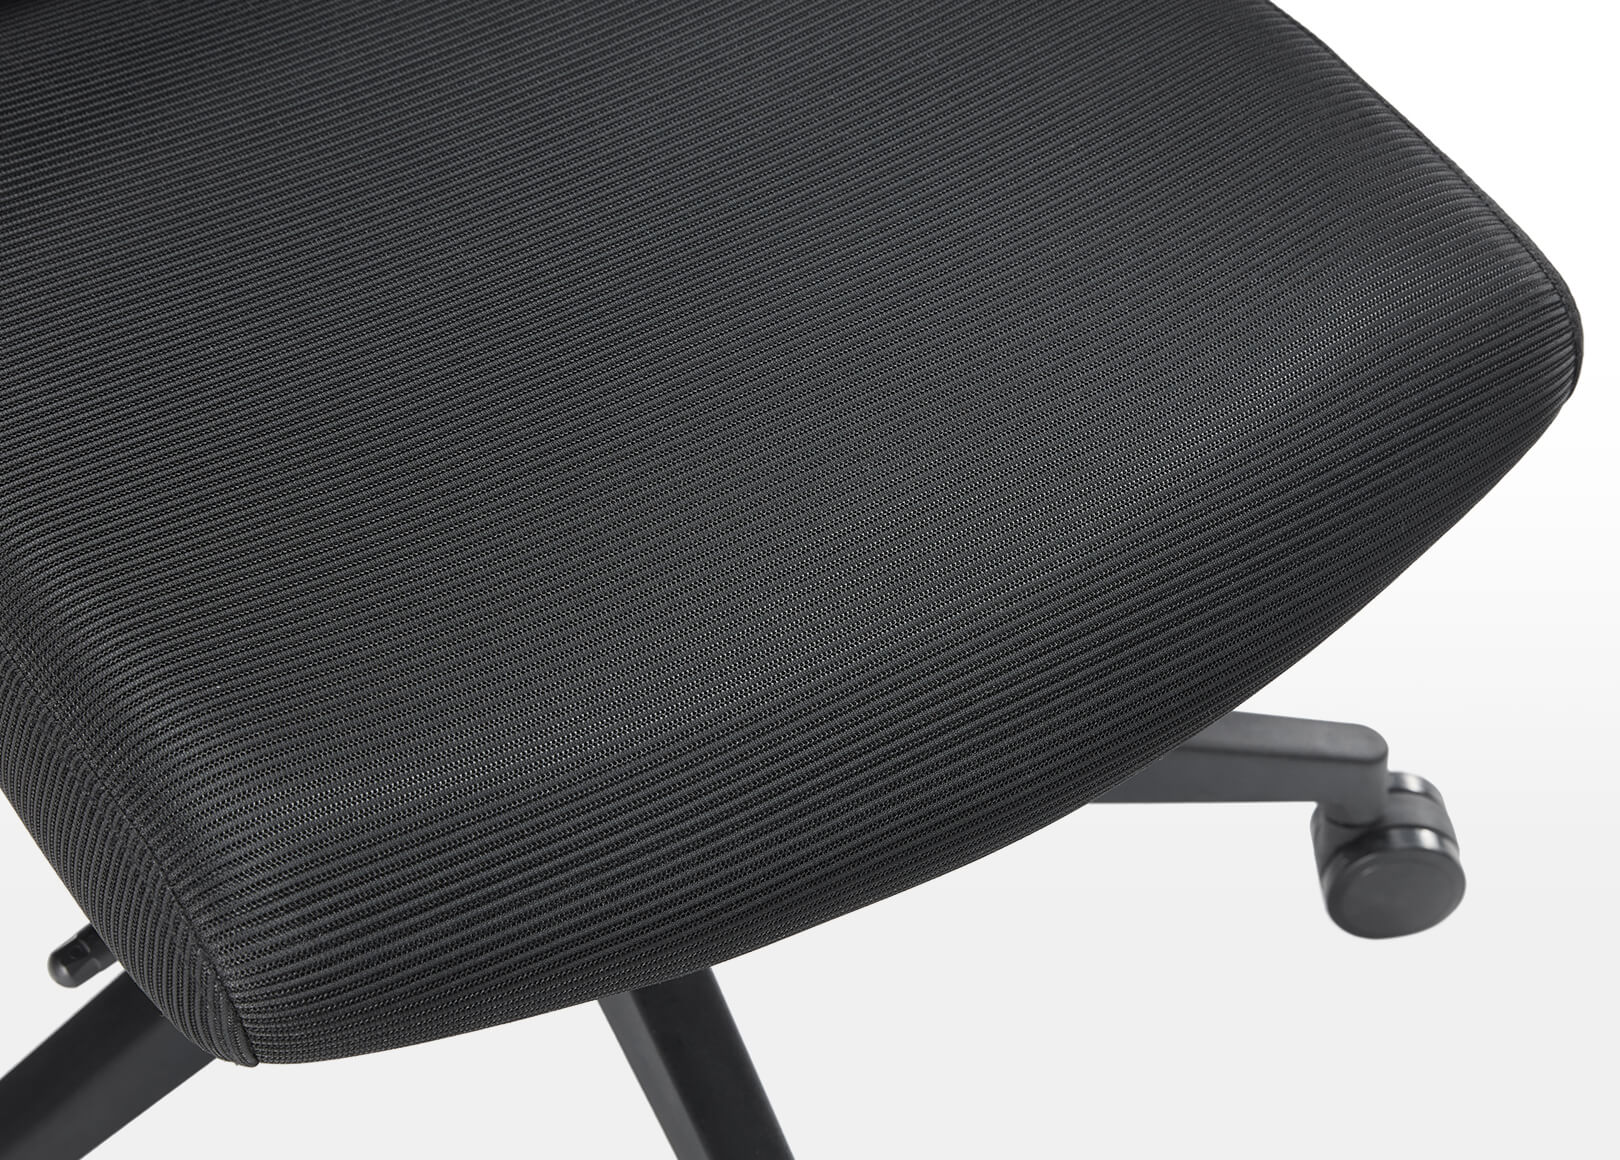 Best office chair for long hours - Soft seat pan made from molded foam for superior comfort